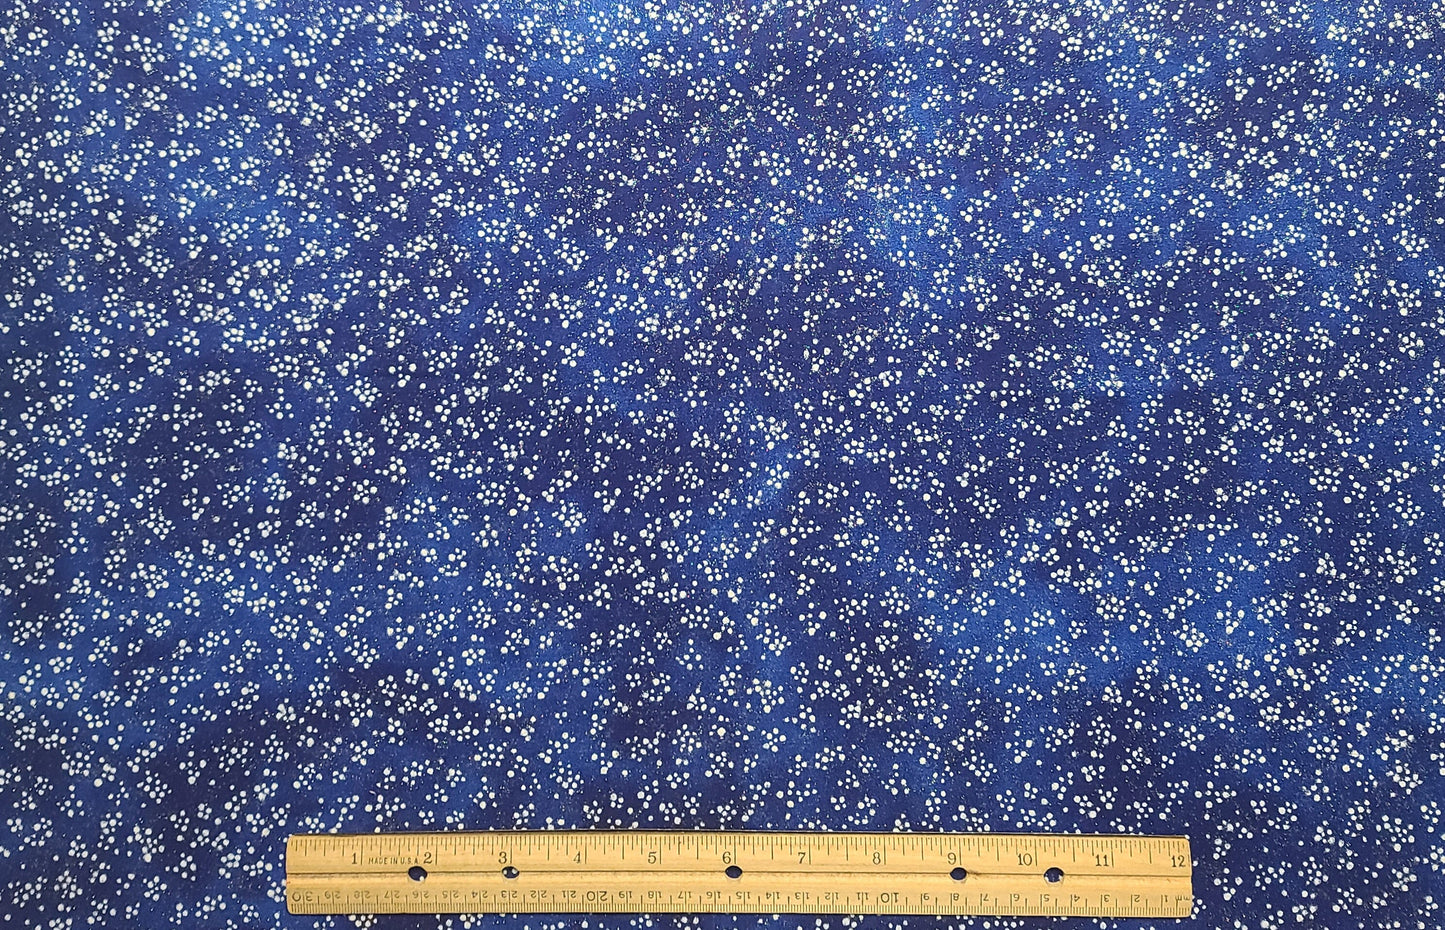 EOB - Blue Tonal Fabric / White "Snow" / Allover Silver Glitter - Selvage to Selvage Print